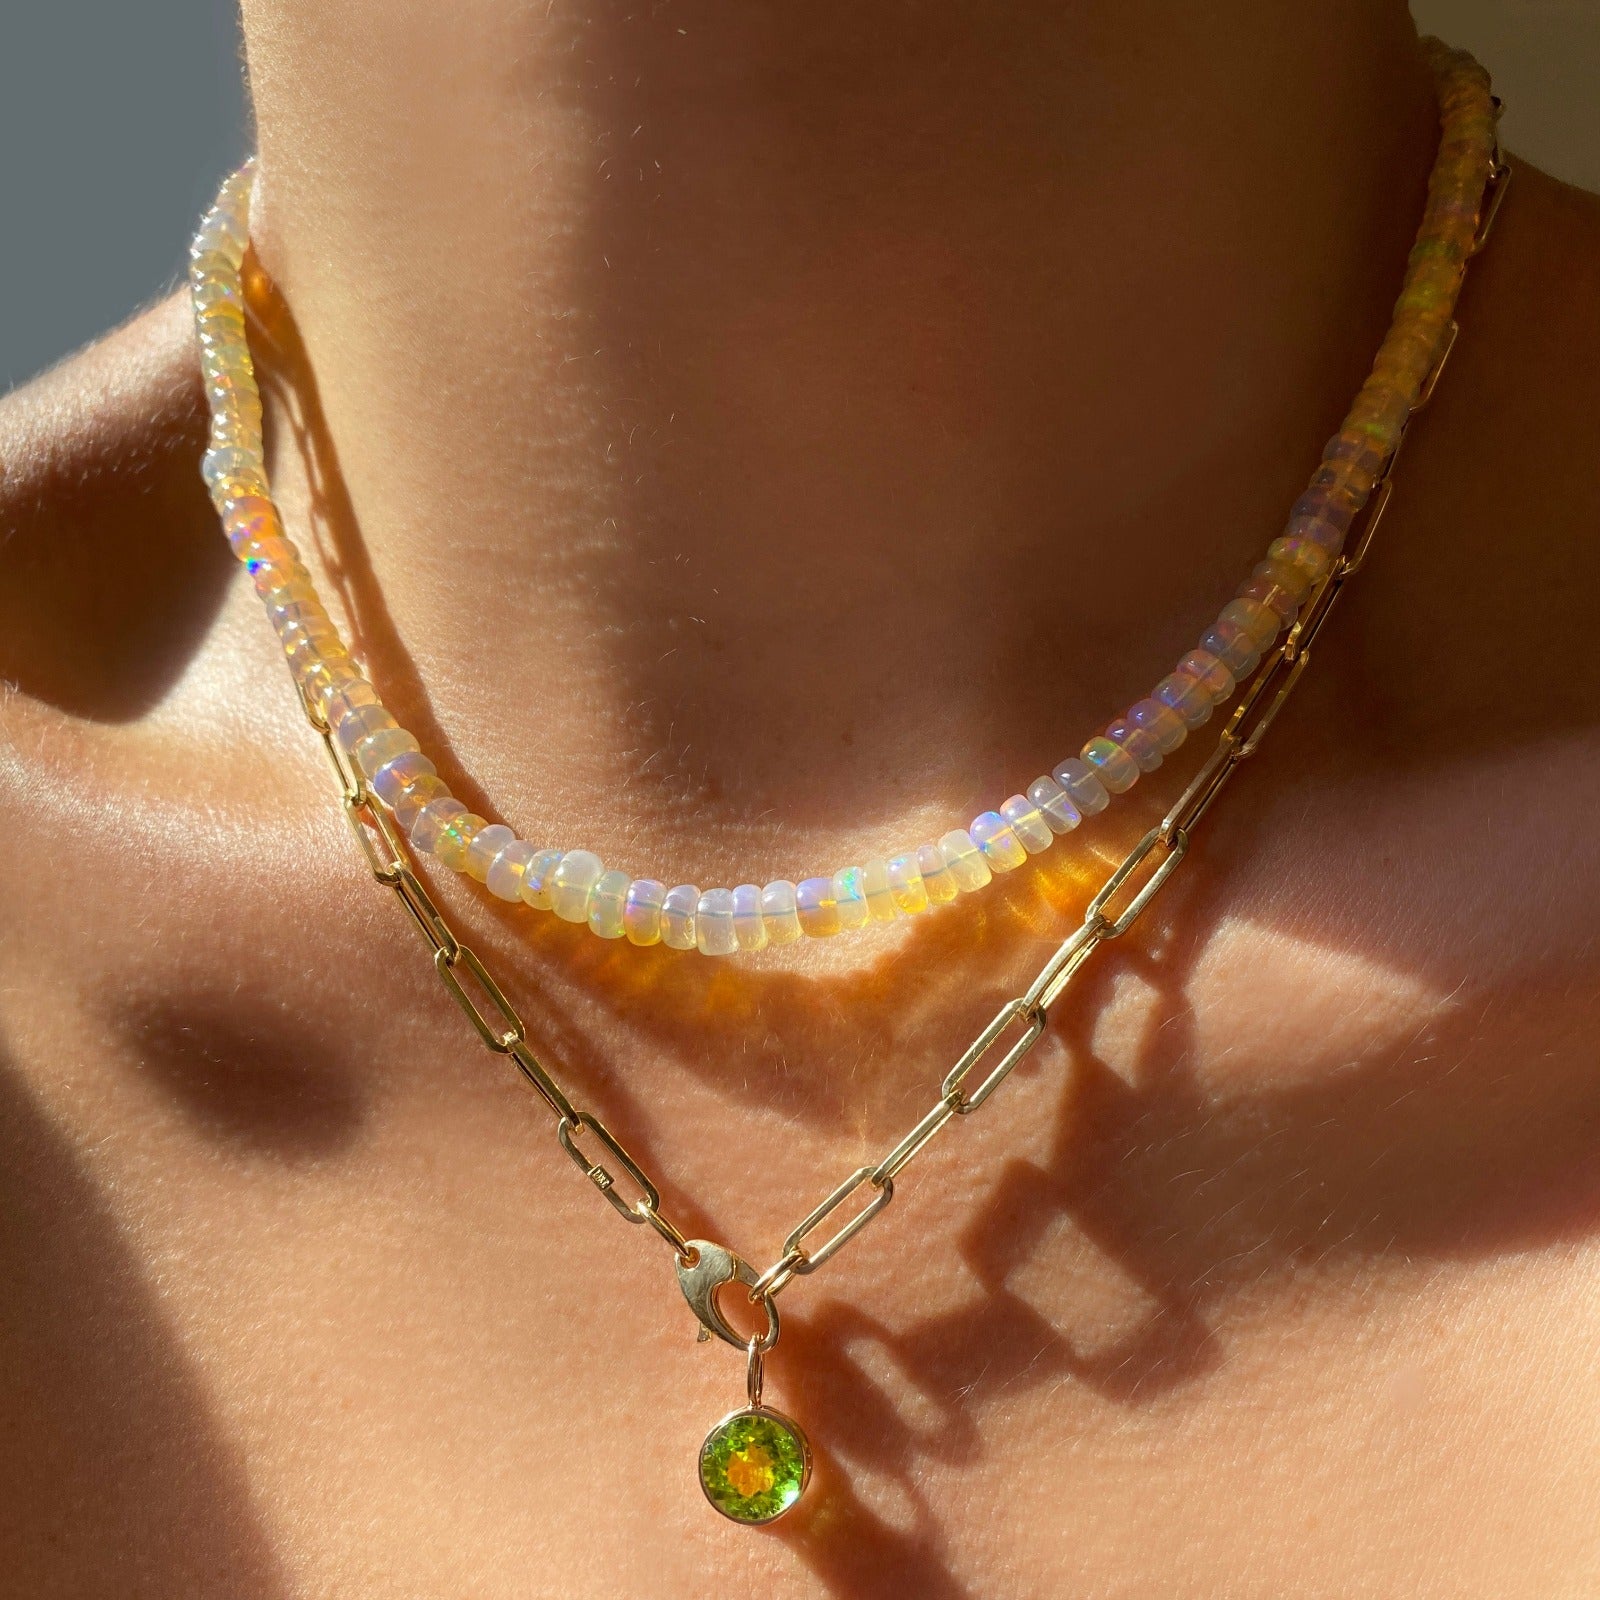 Shimmering beaded necklace made of smooth opal rondels in shades of light yellow and clear opals on a slim gold lobster clasp. Styled on a neck layered with a paperclip chain necklace and round solitaire charm.